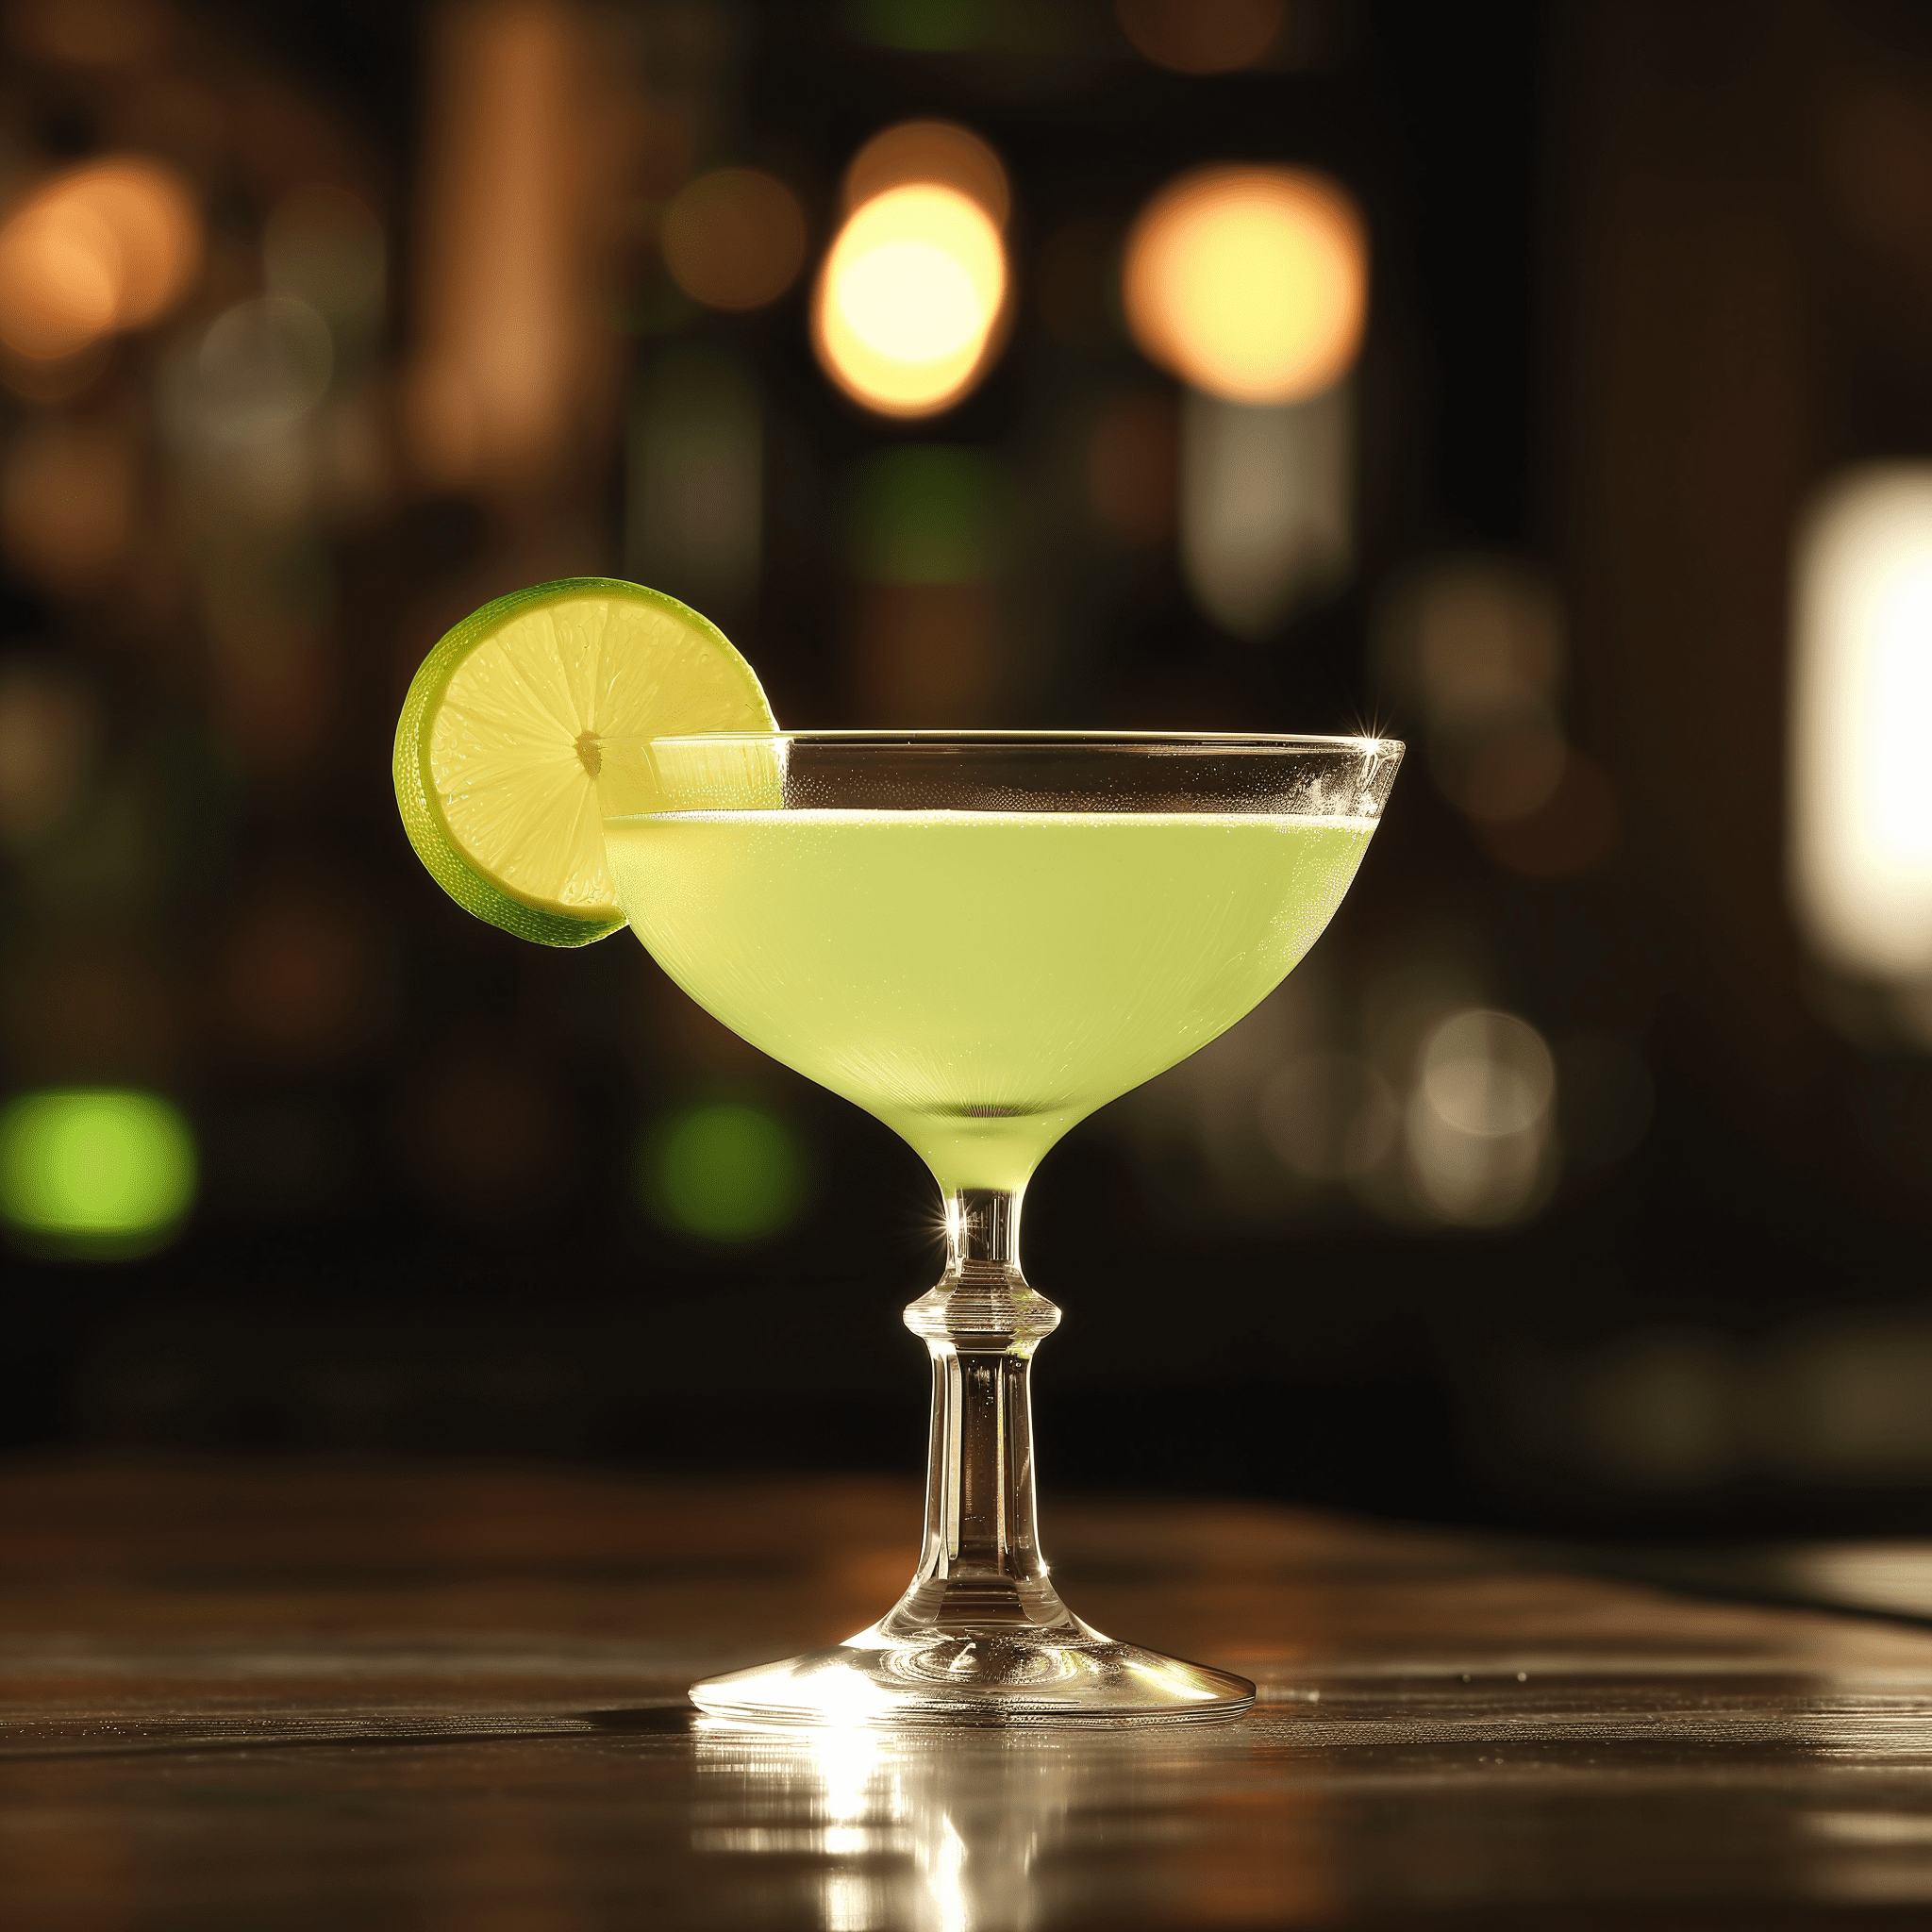 Bennett Cocktail Recipe - The Bennett Cocktail is a harmonious blend of sour and sweet, with the botanical notes of gin shining through. The lime juice provides a zesty tang, while the simple syrup softens the edges, and the bitters bring a subtle spiced depth to the drink.